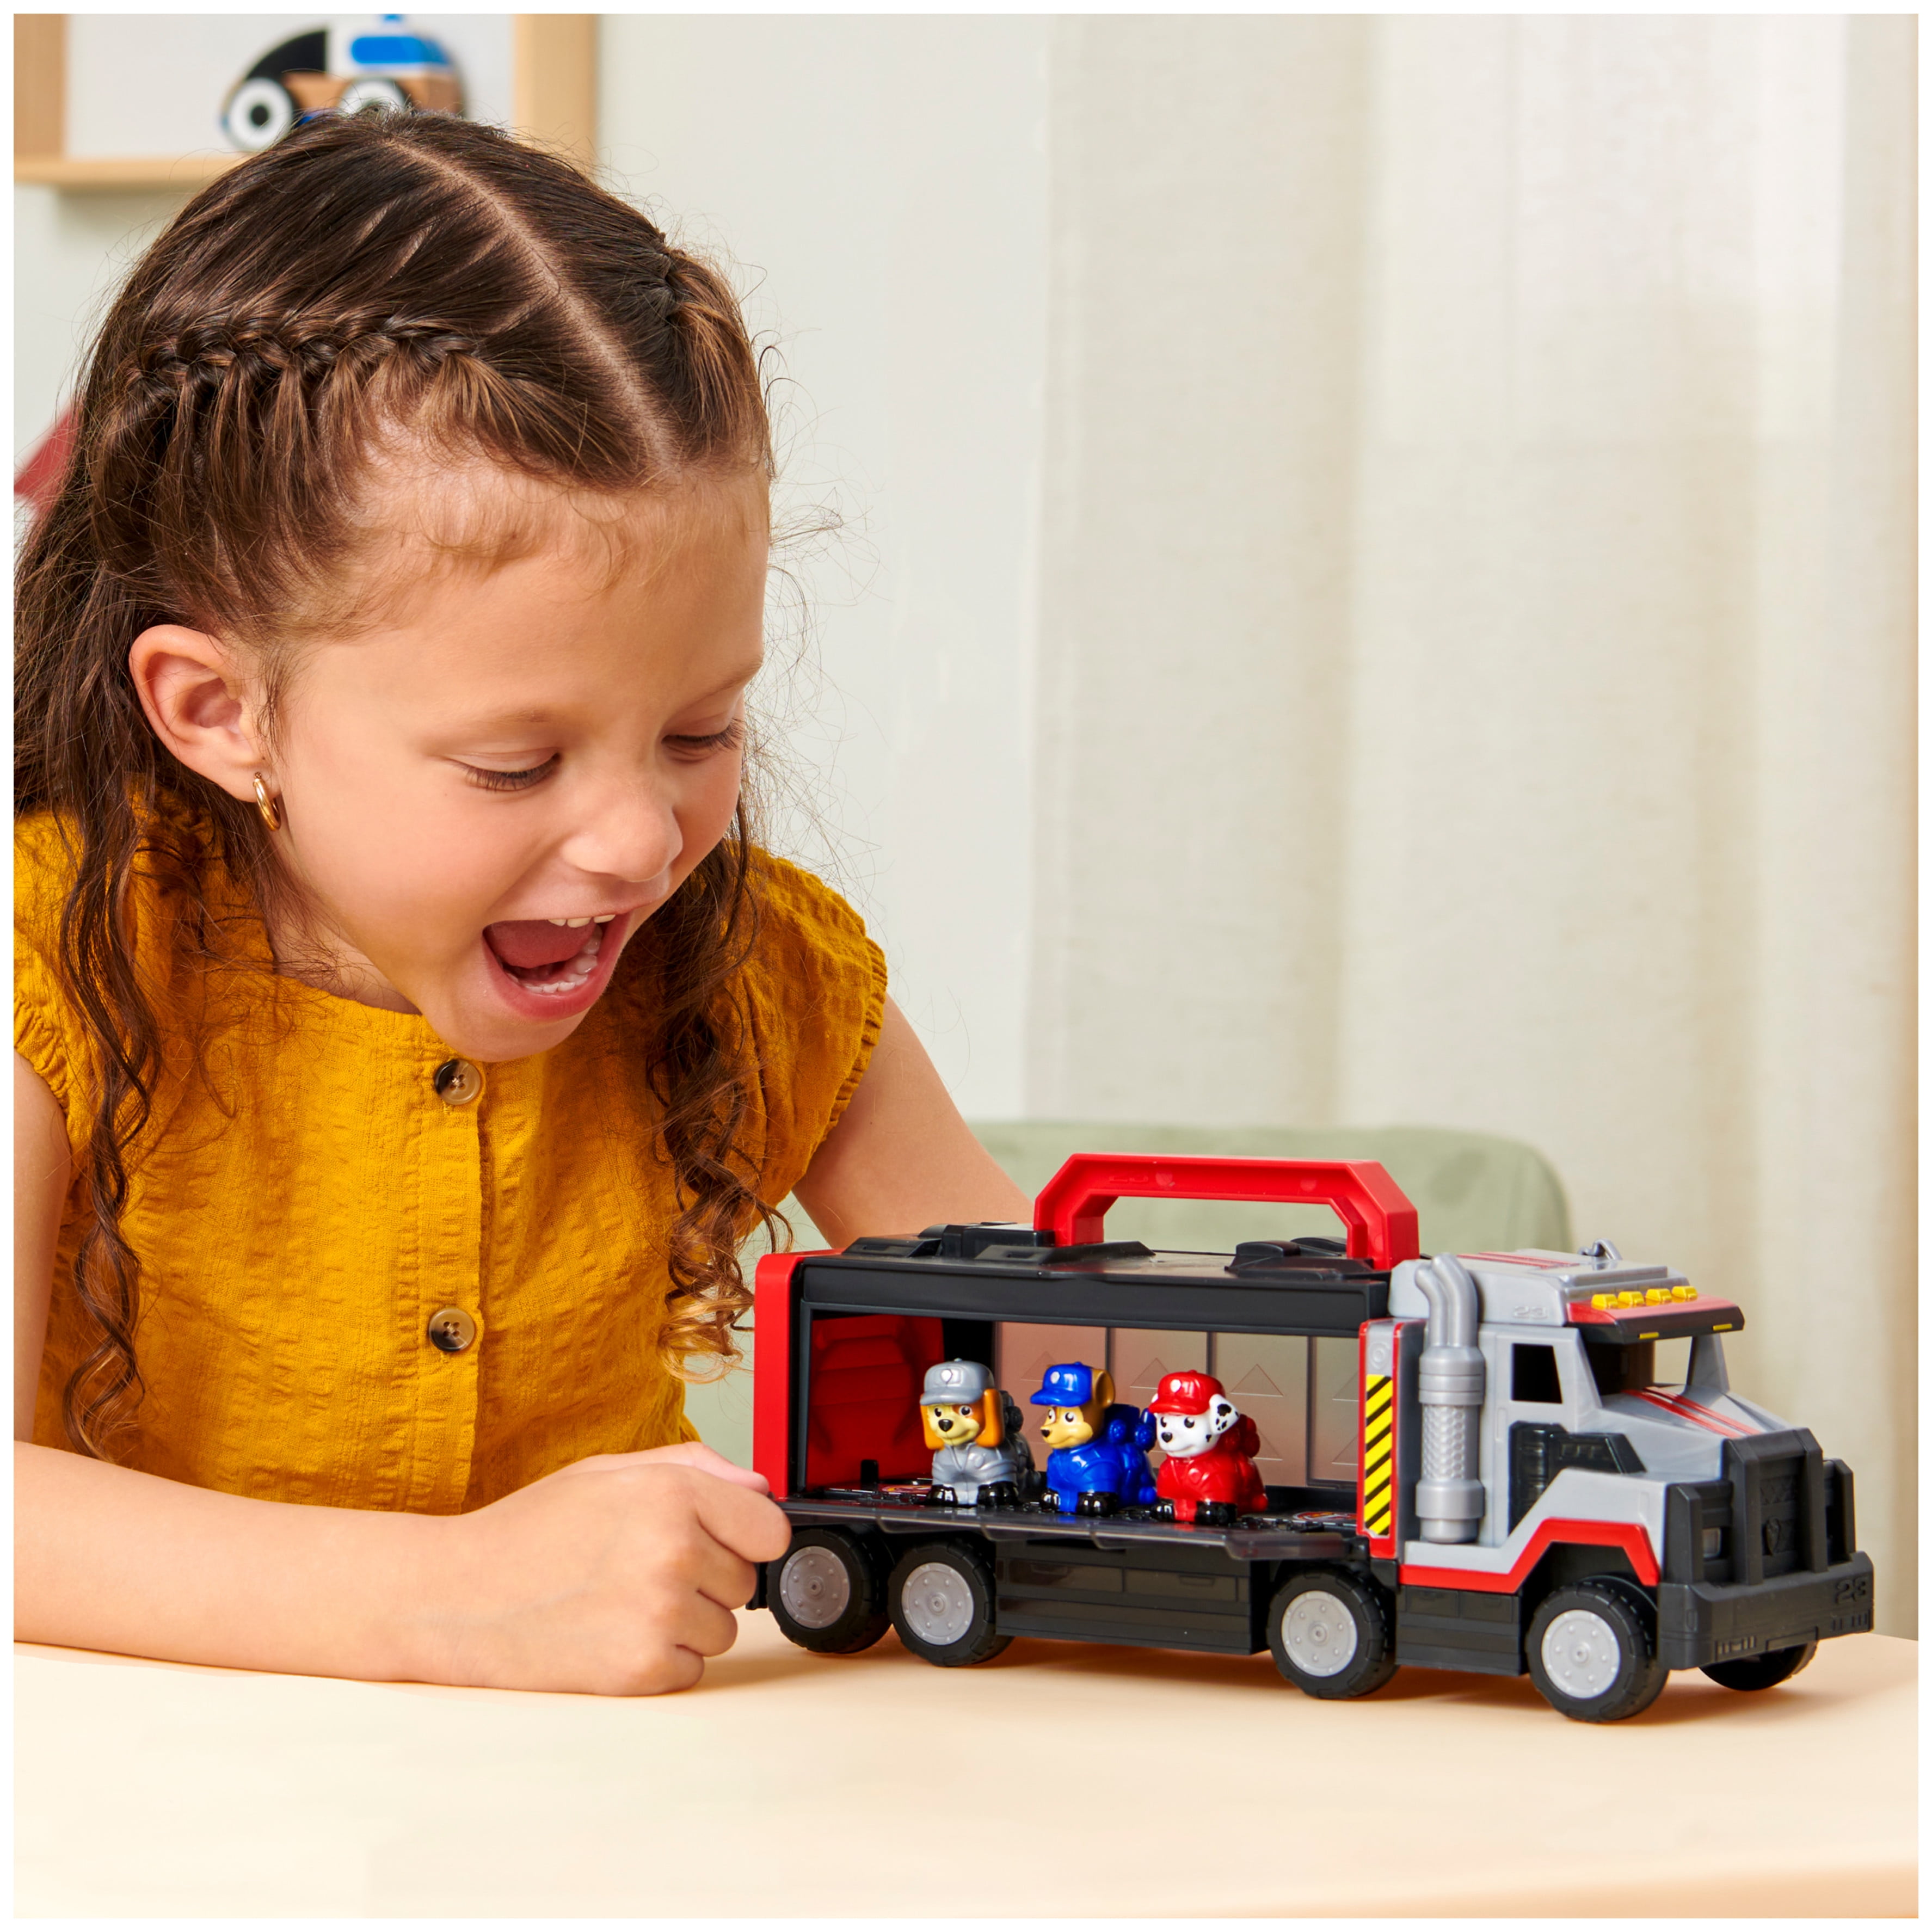 PAW Patrol, Micro Movers, Al Truck Storage Case with Action Figures, for Ages 3 and up - 1